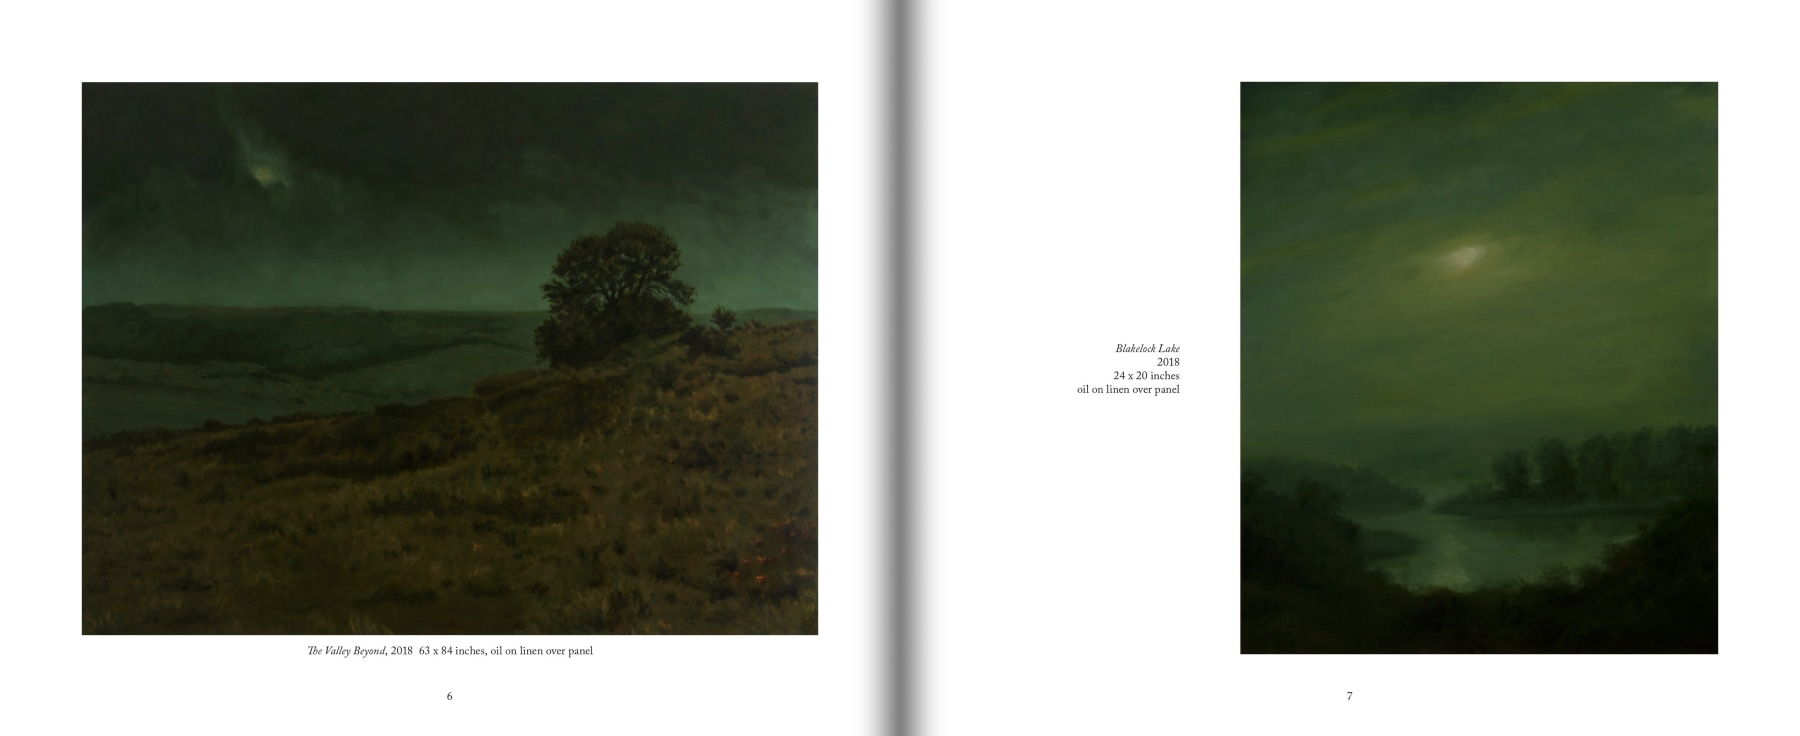 Pages 6 and 7 of CHRIS PETERS: The Eye Begins to See with images of &quot;The Valley Beyond&quot;, 2018 and &quot;Blakelock Lake&quot;, 2018